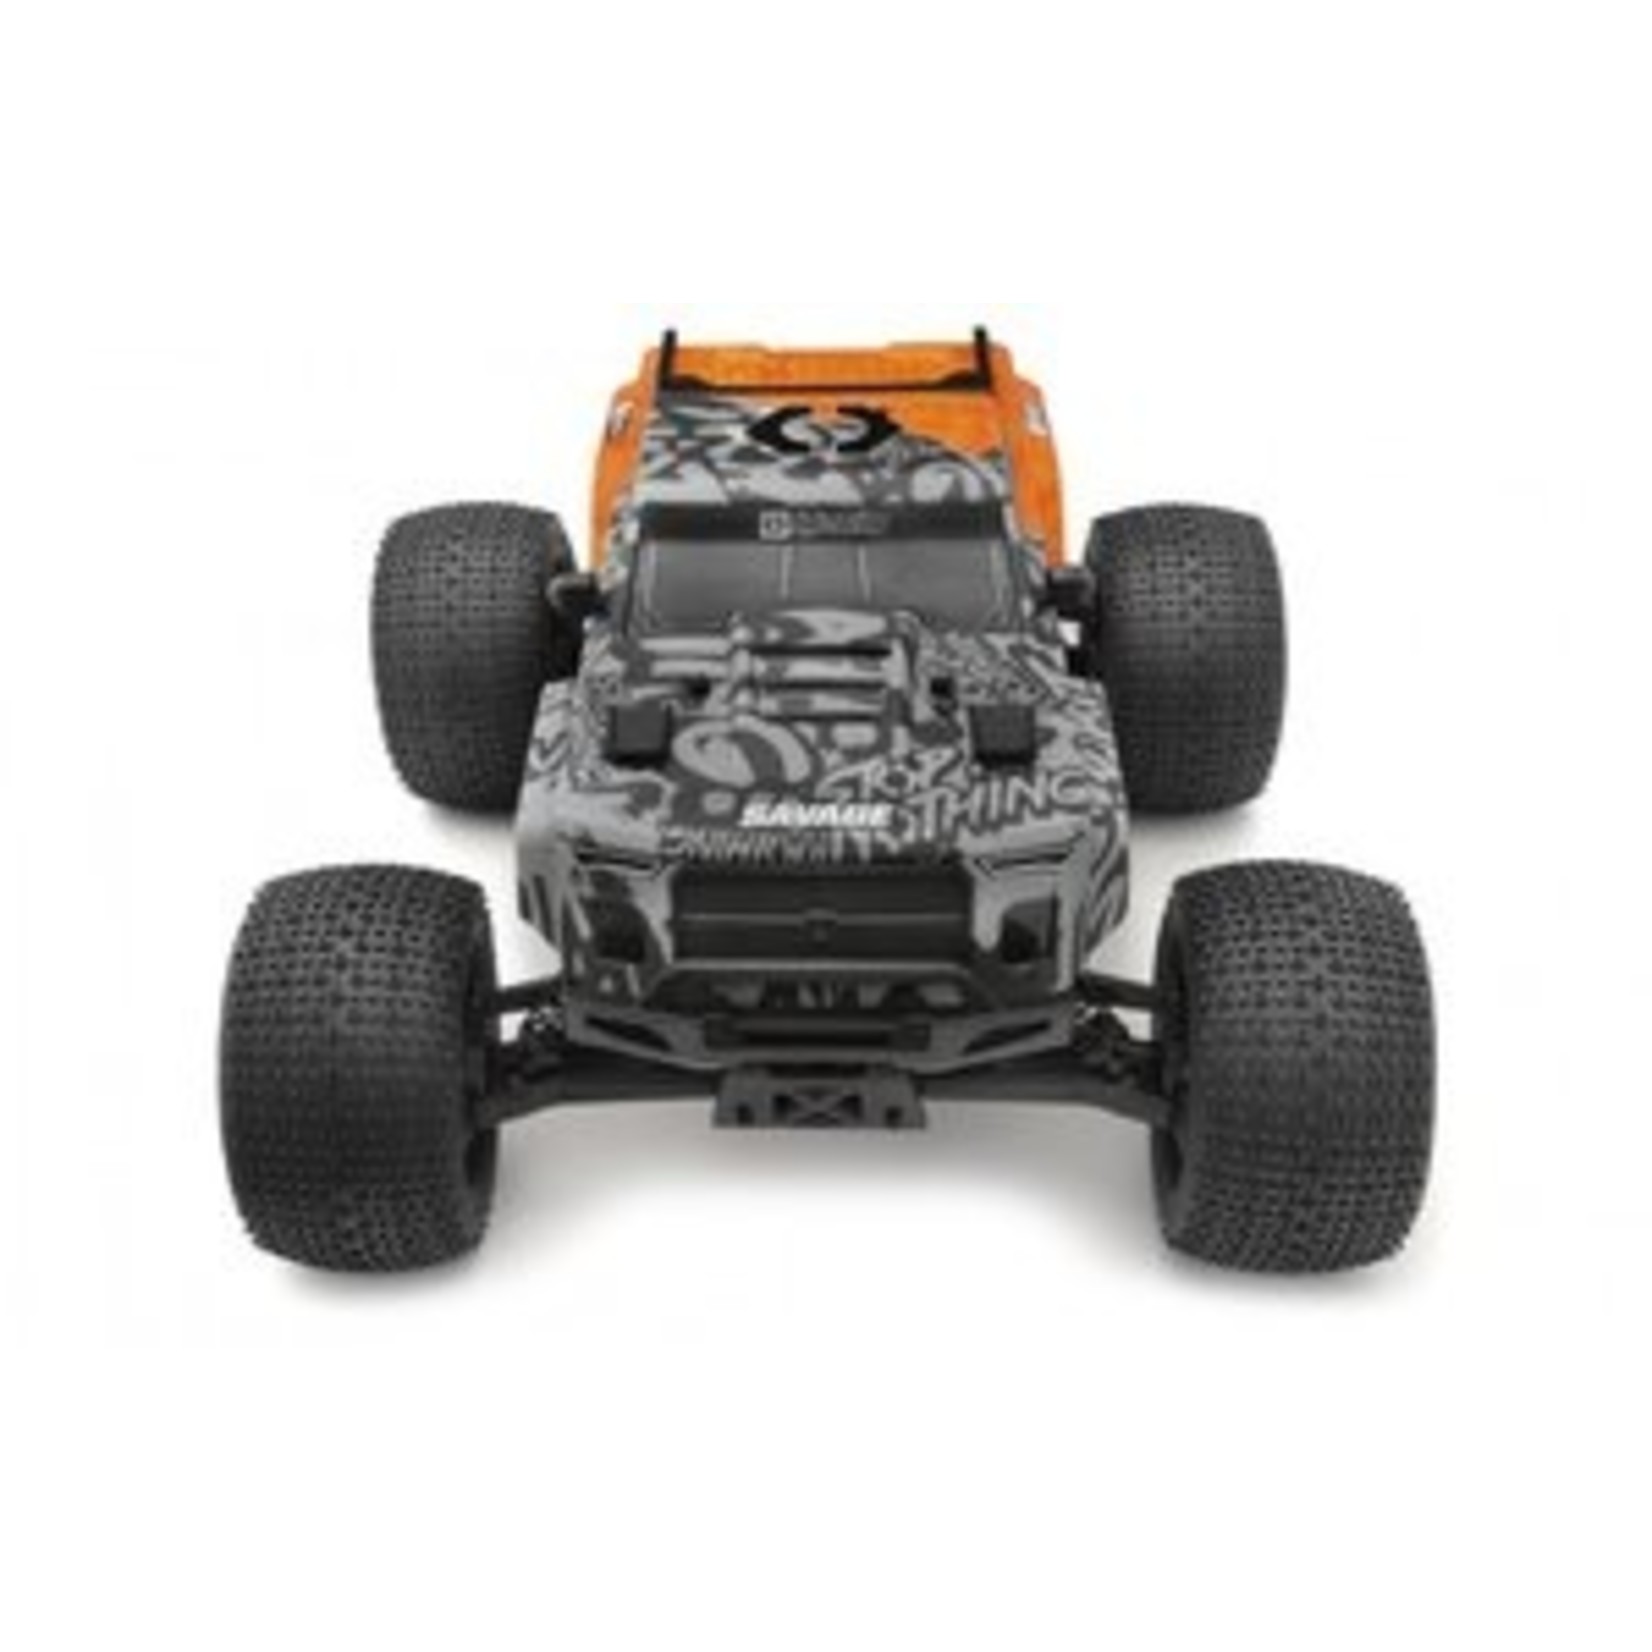 HPI Racing HPI160100 Savage X 4.6 GT-6 1/8th 4WD Nitro Monster Truck